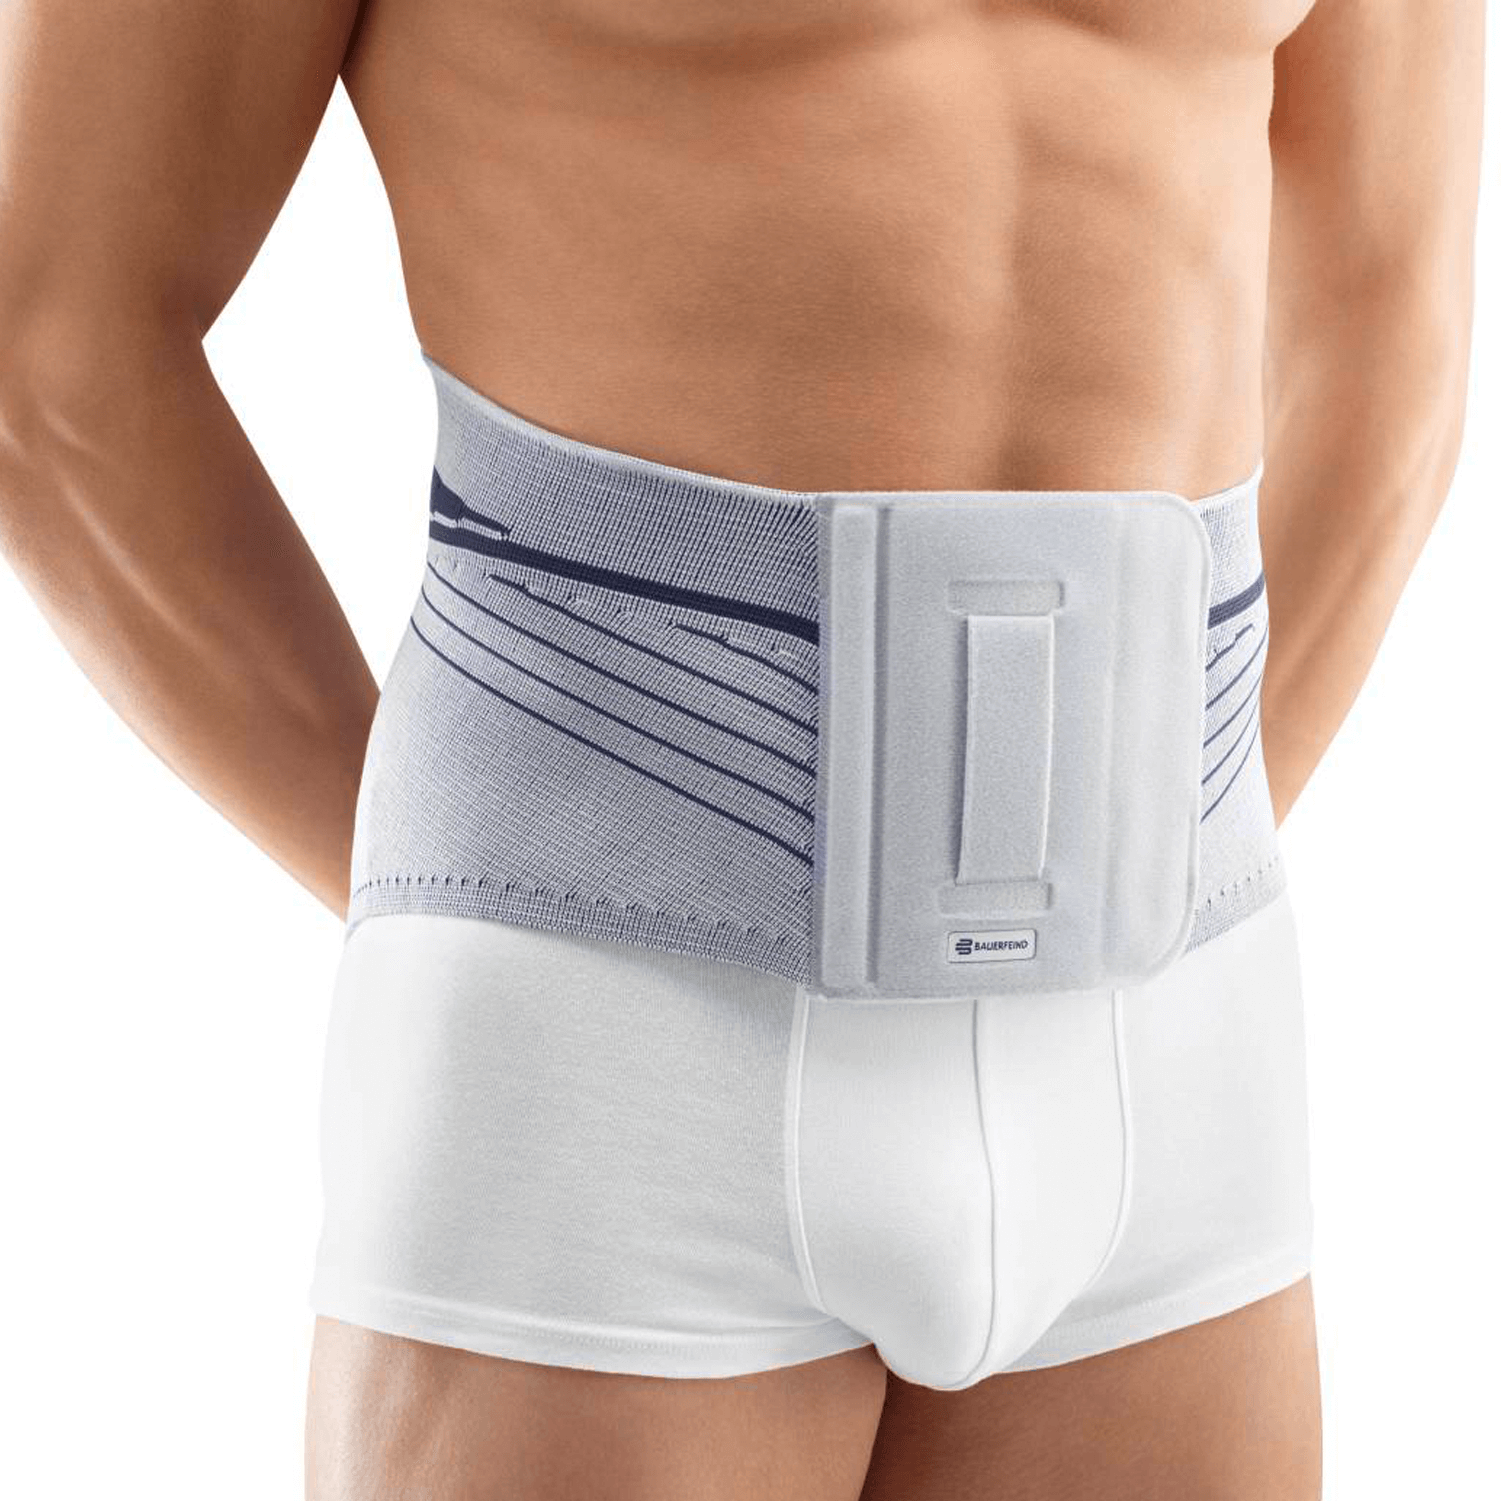 FlexGuard Support Back Brace (Ceinture Lombaire) For Women And Men - Lumbar  Belt For Lower Back - Strong Compression, Pain Relief, Pockets For Heat Or